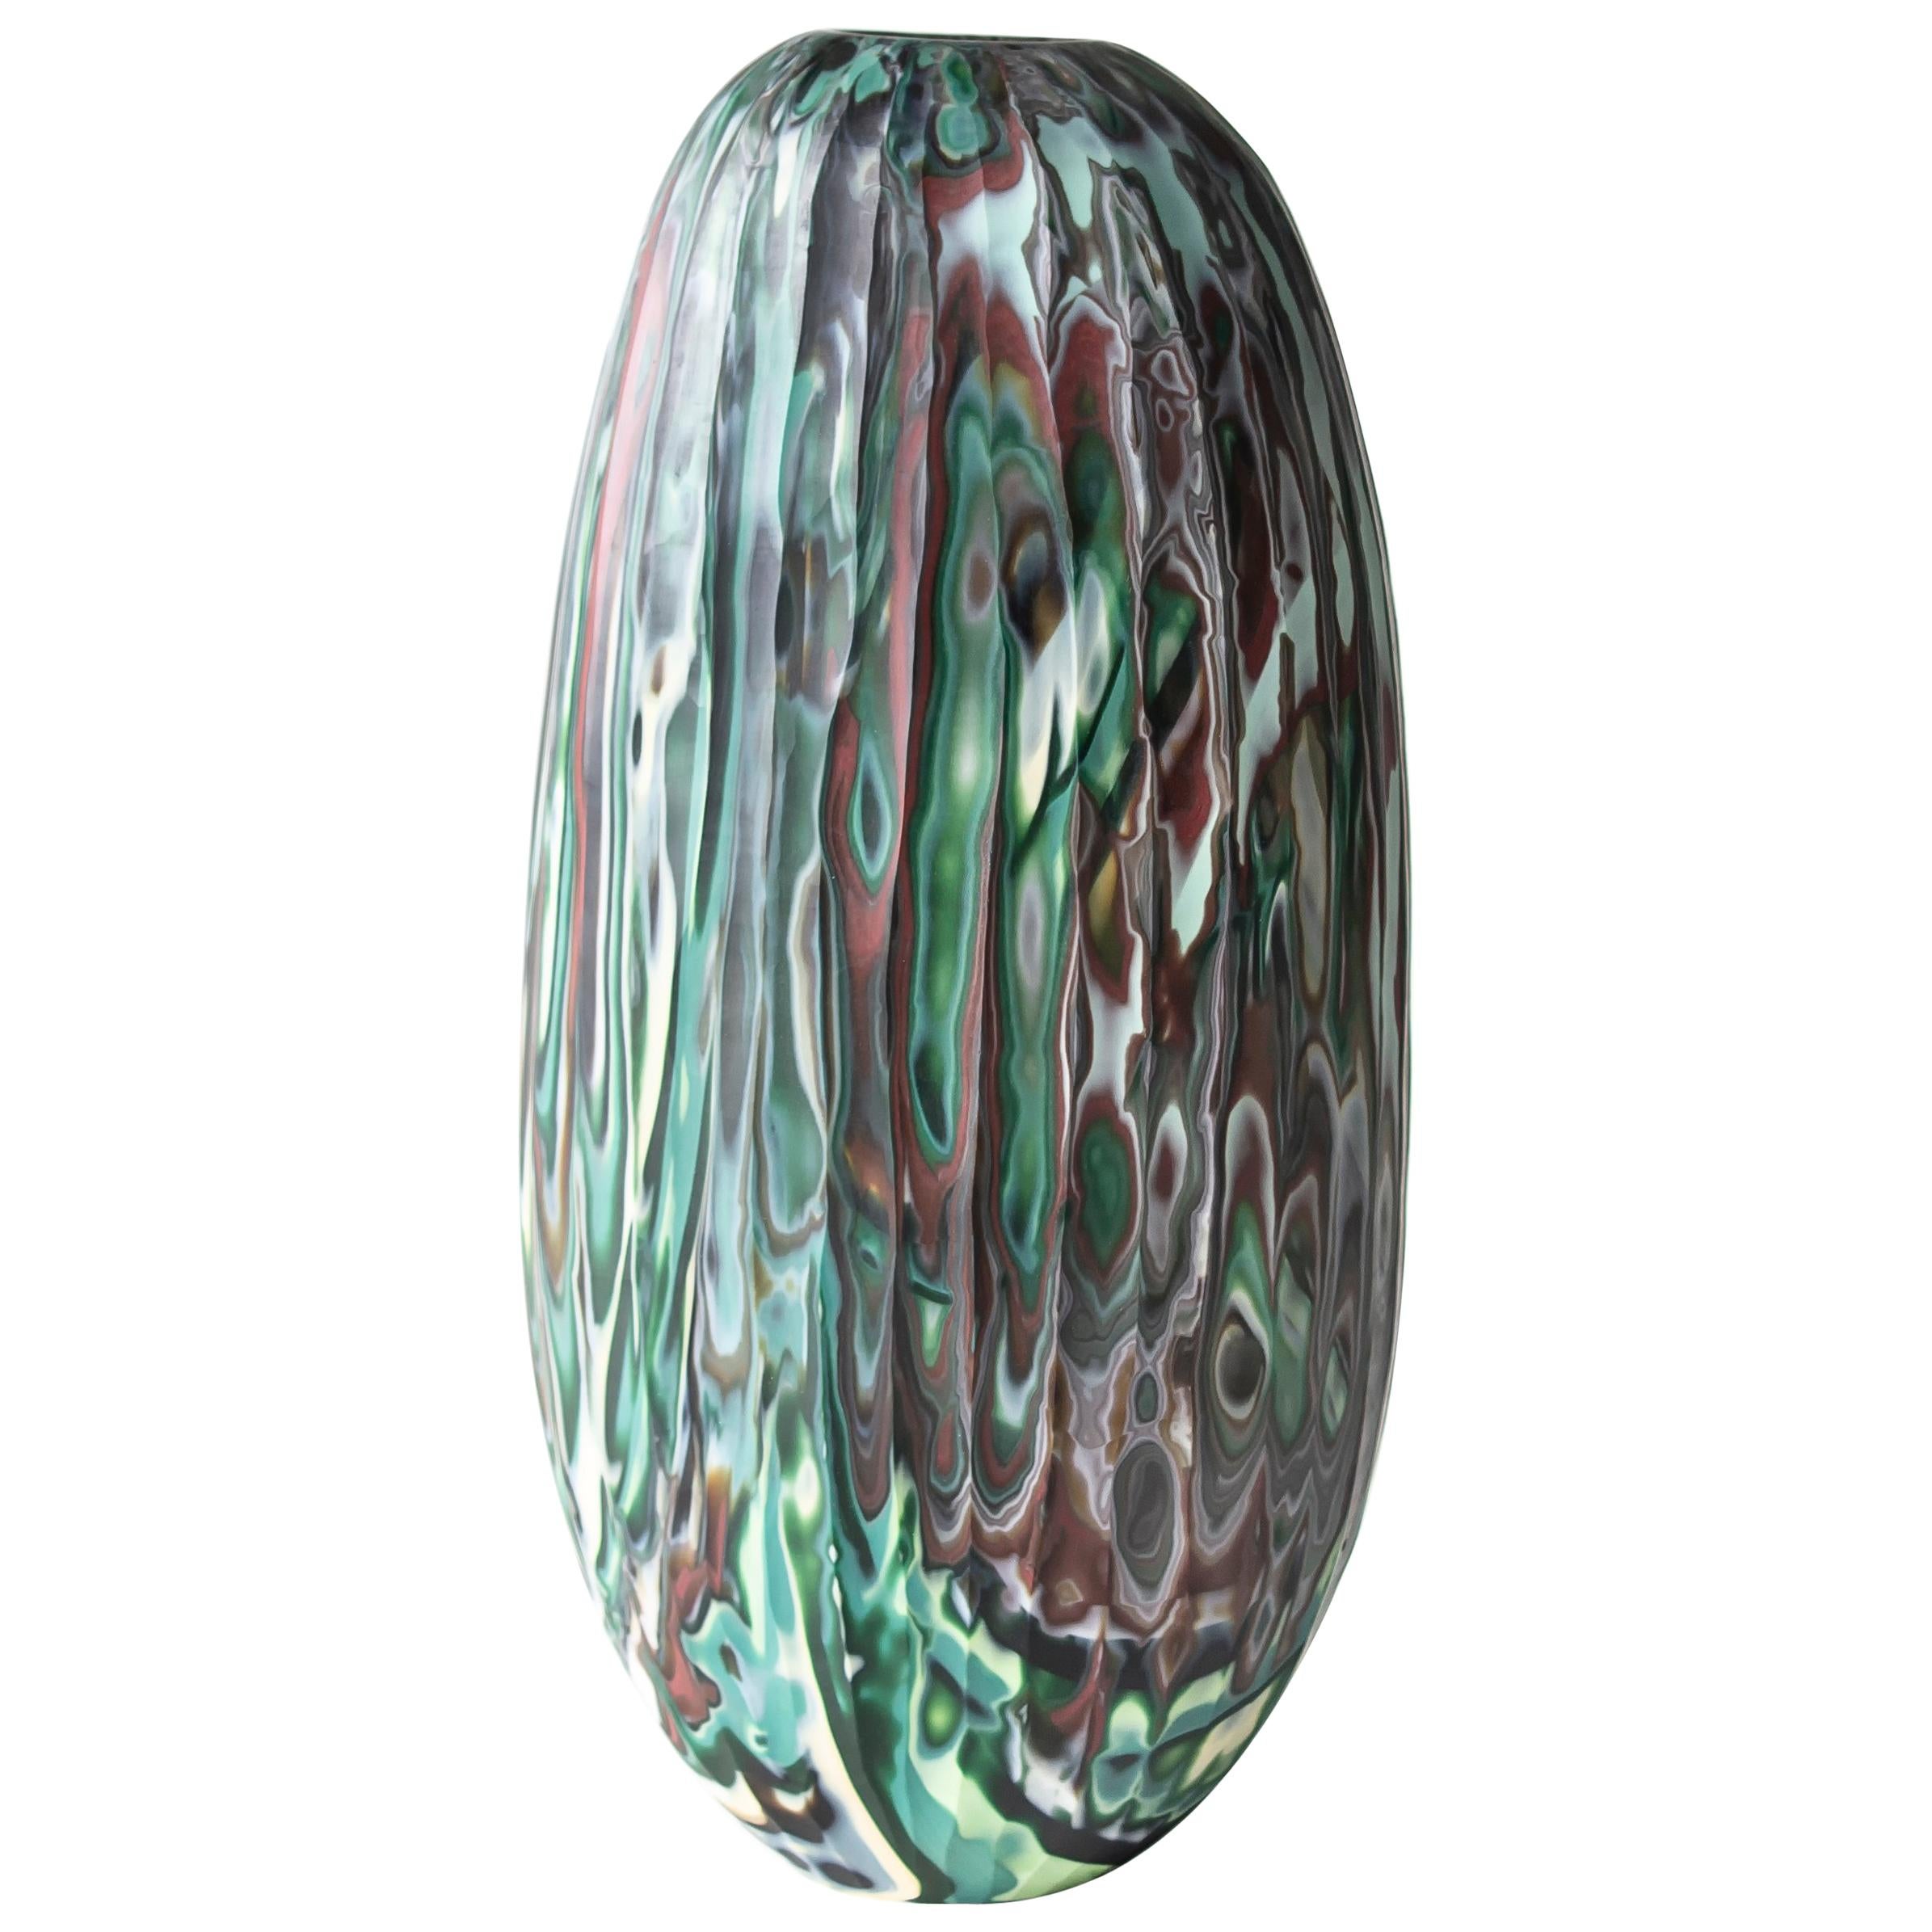 Carved Green Vase, Italian Technique, Handblown Glass by Caleb Siemon - In Stock